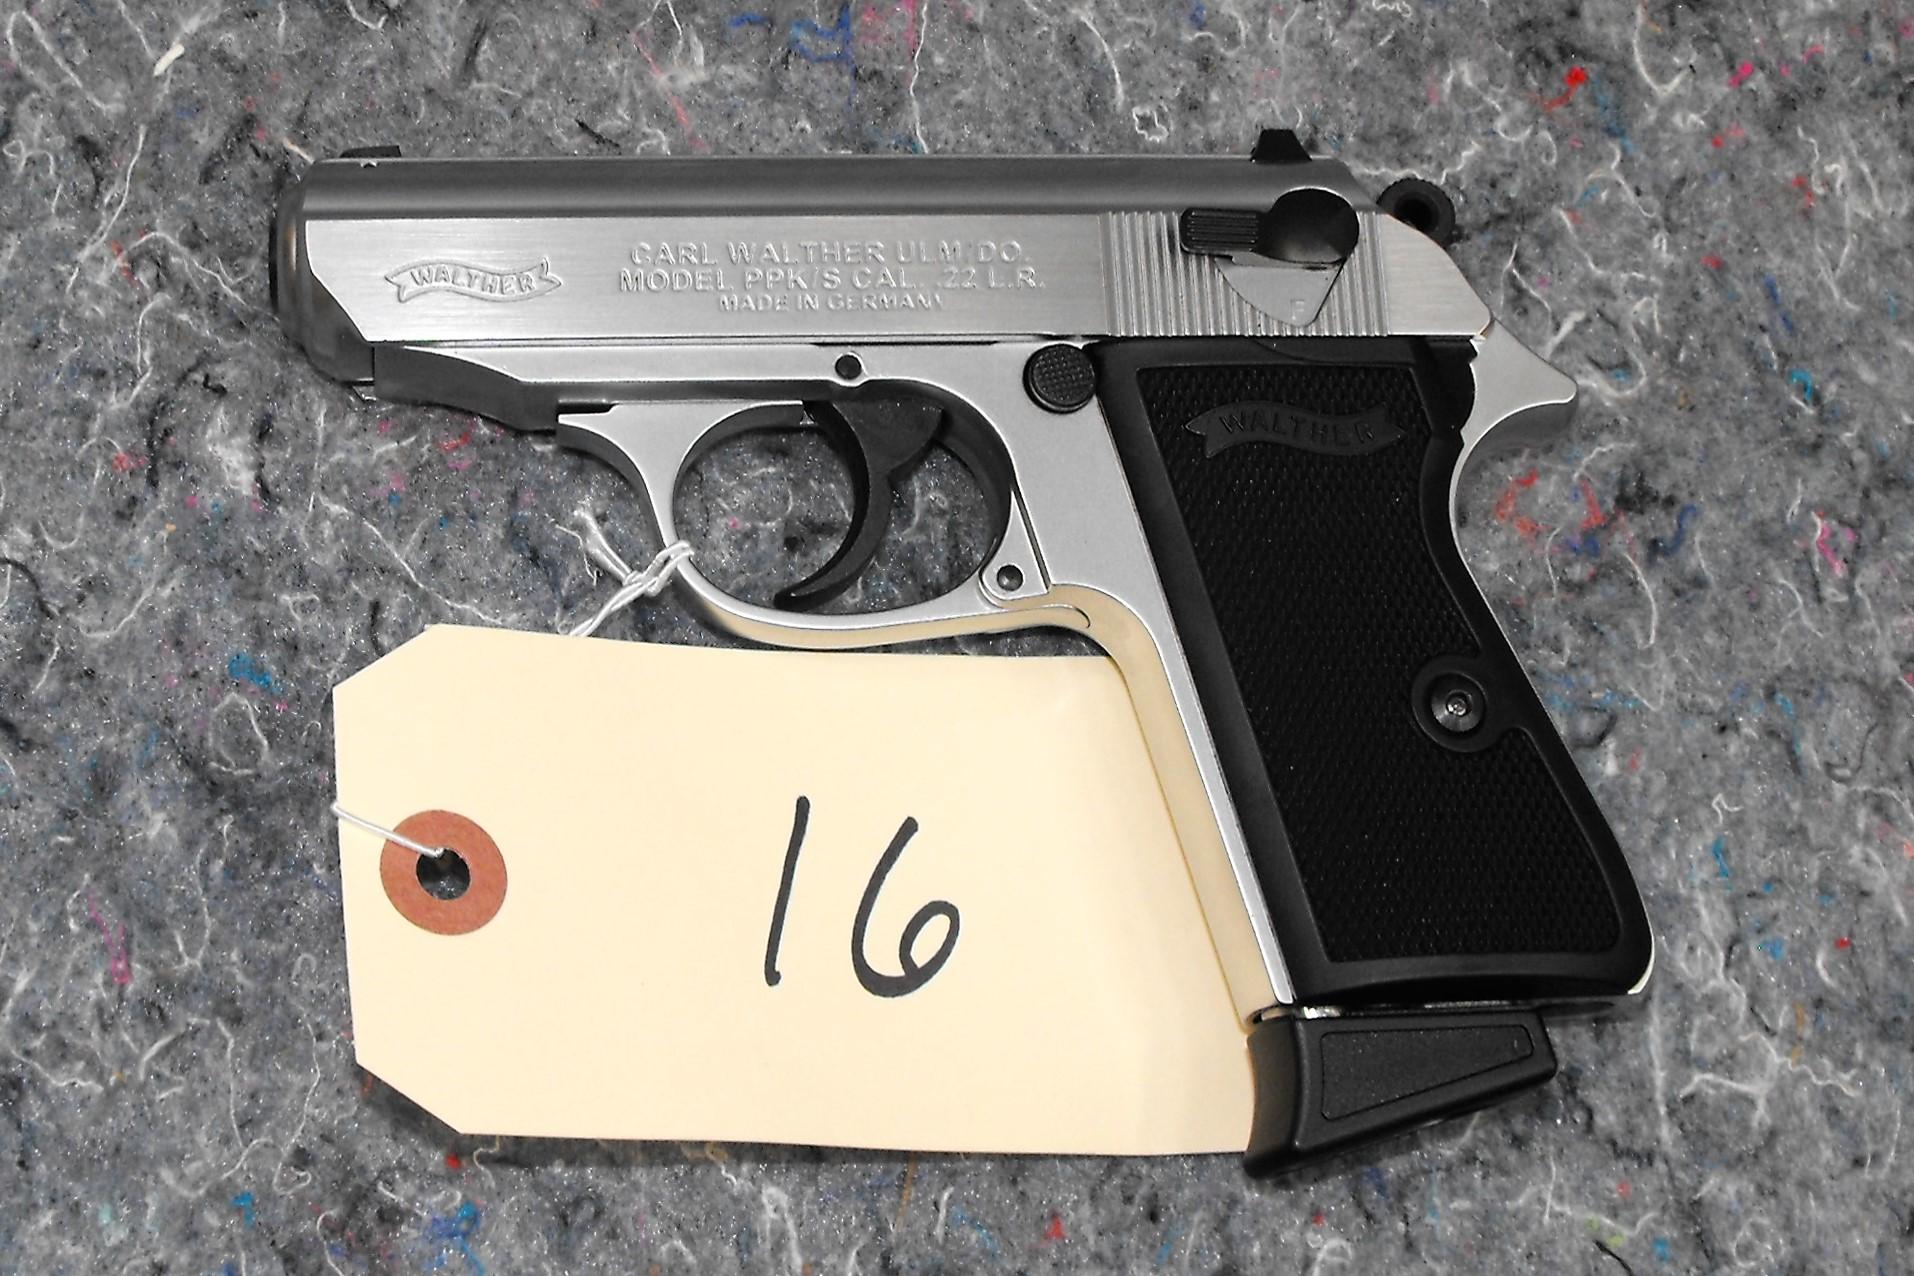 (R) Walther PPK/S Cal 22 LR Pistol